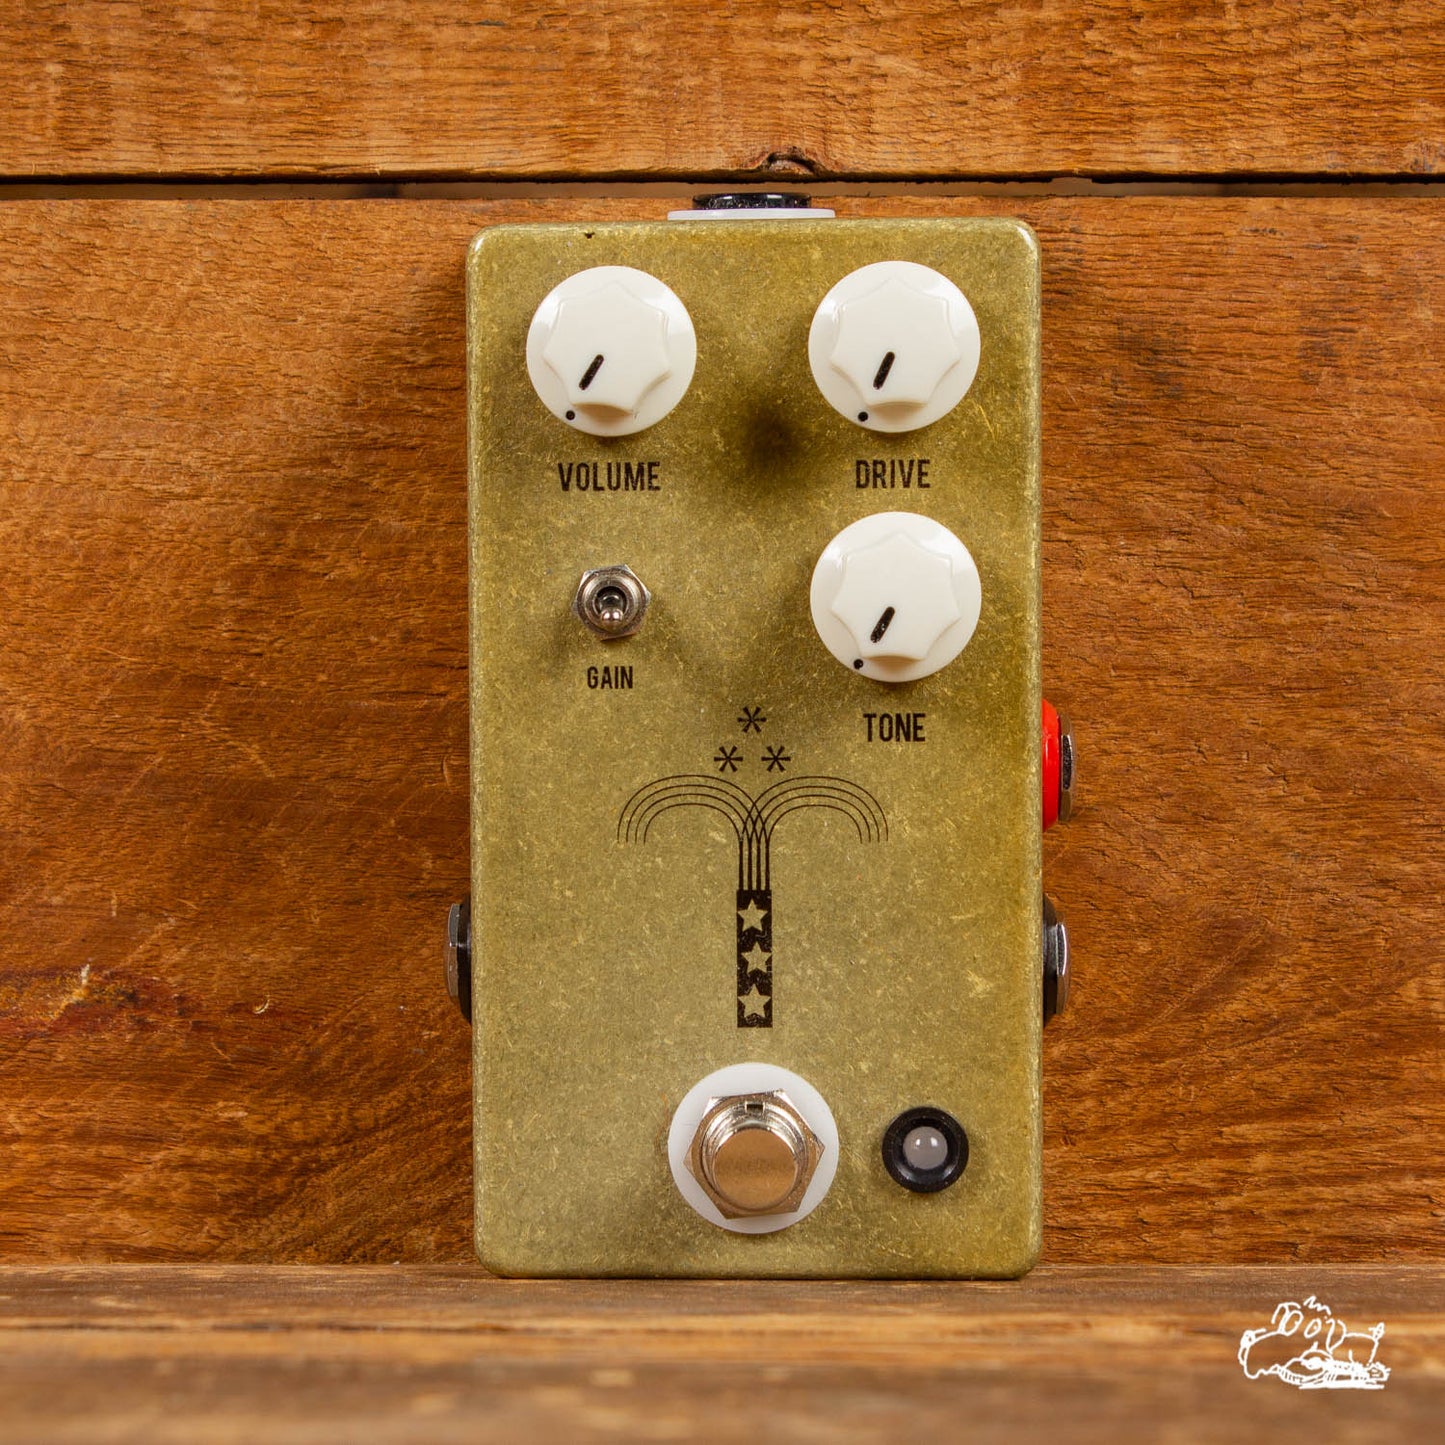 JHS Morning Glory V4 Gold Overdrive Guitar Pedal